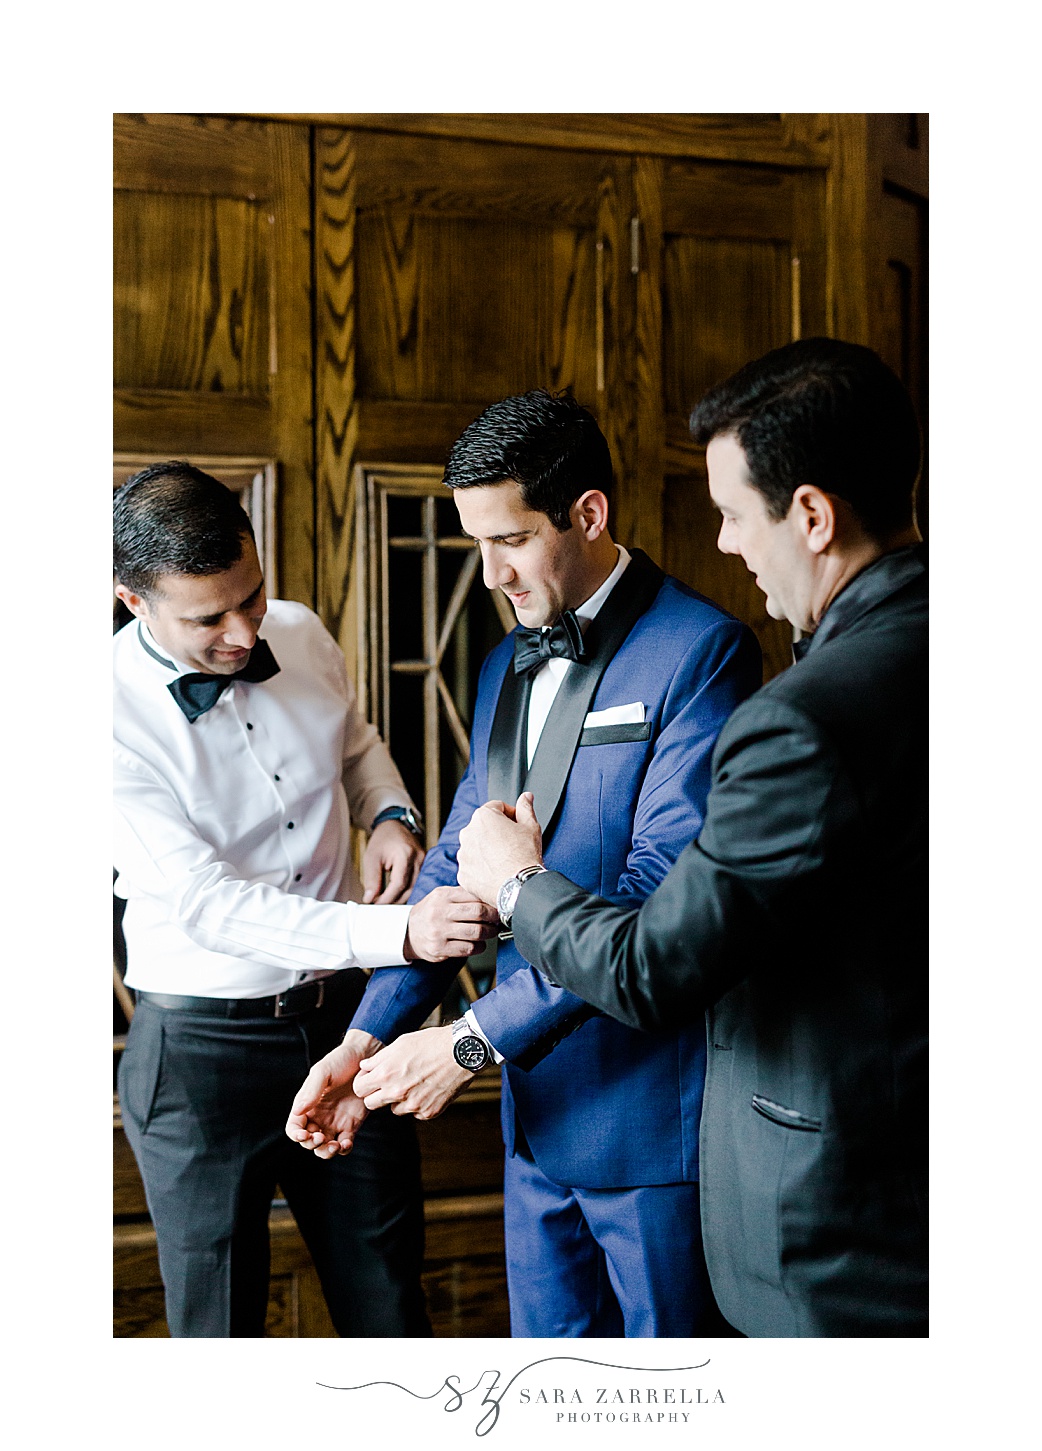 groomsmen help groom into blue suit jacket with black lapels at the Chanler